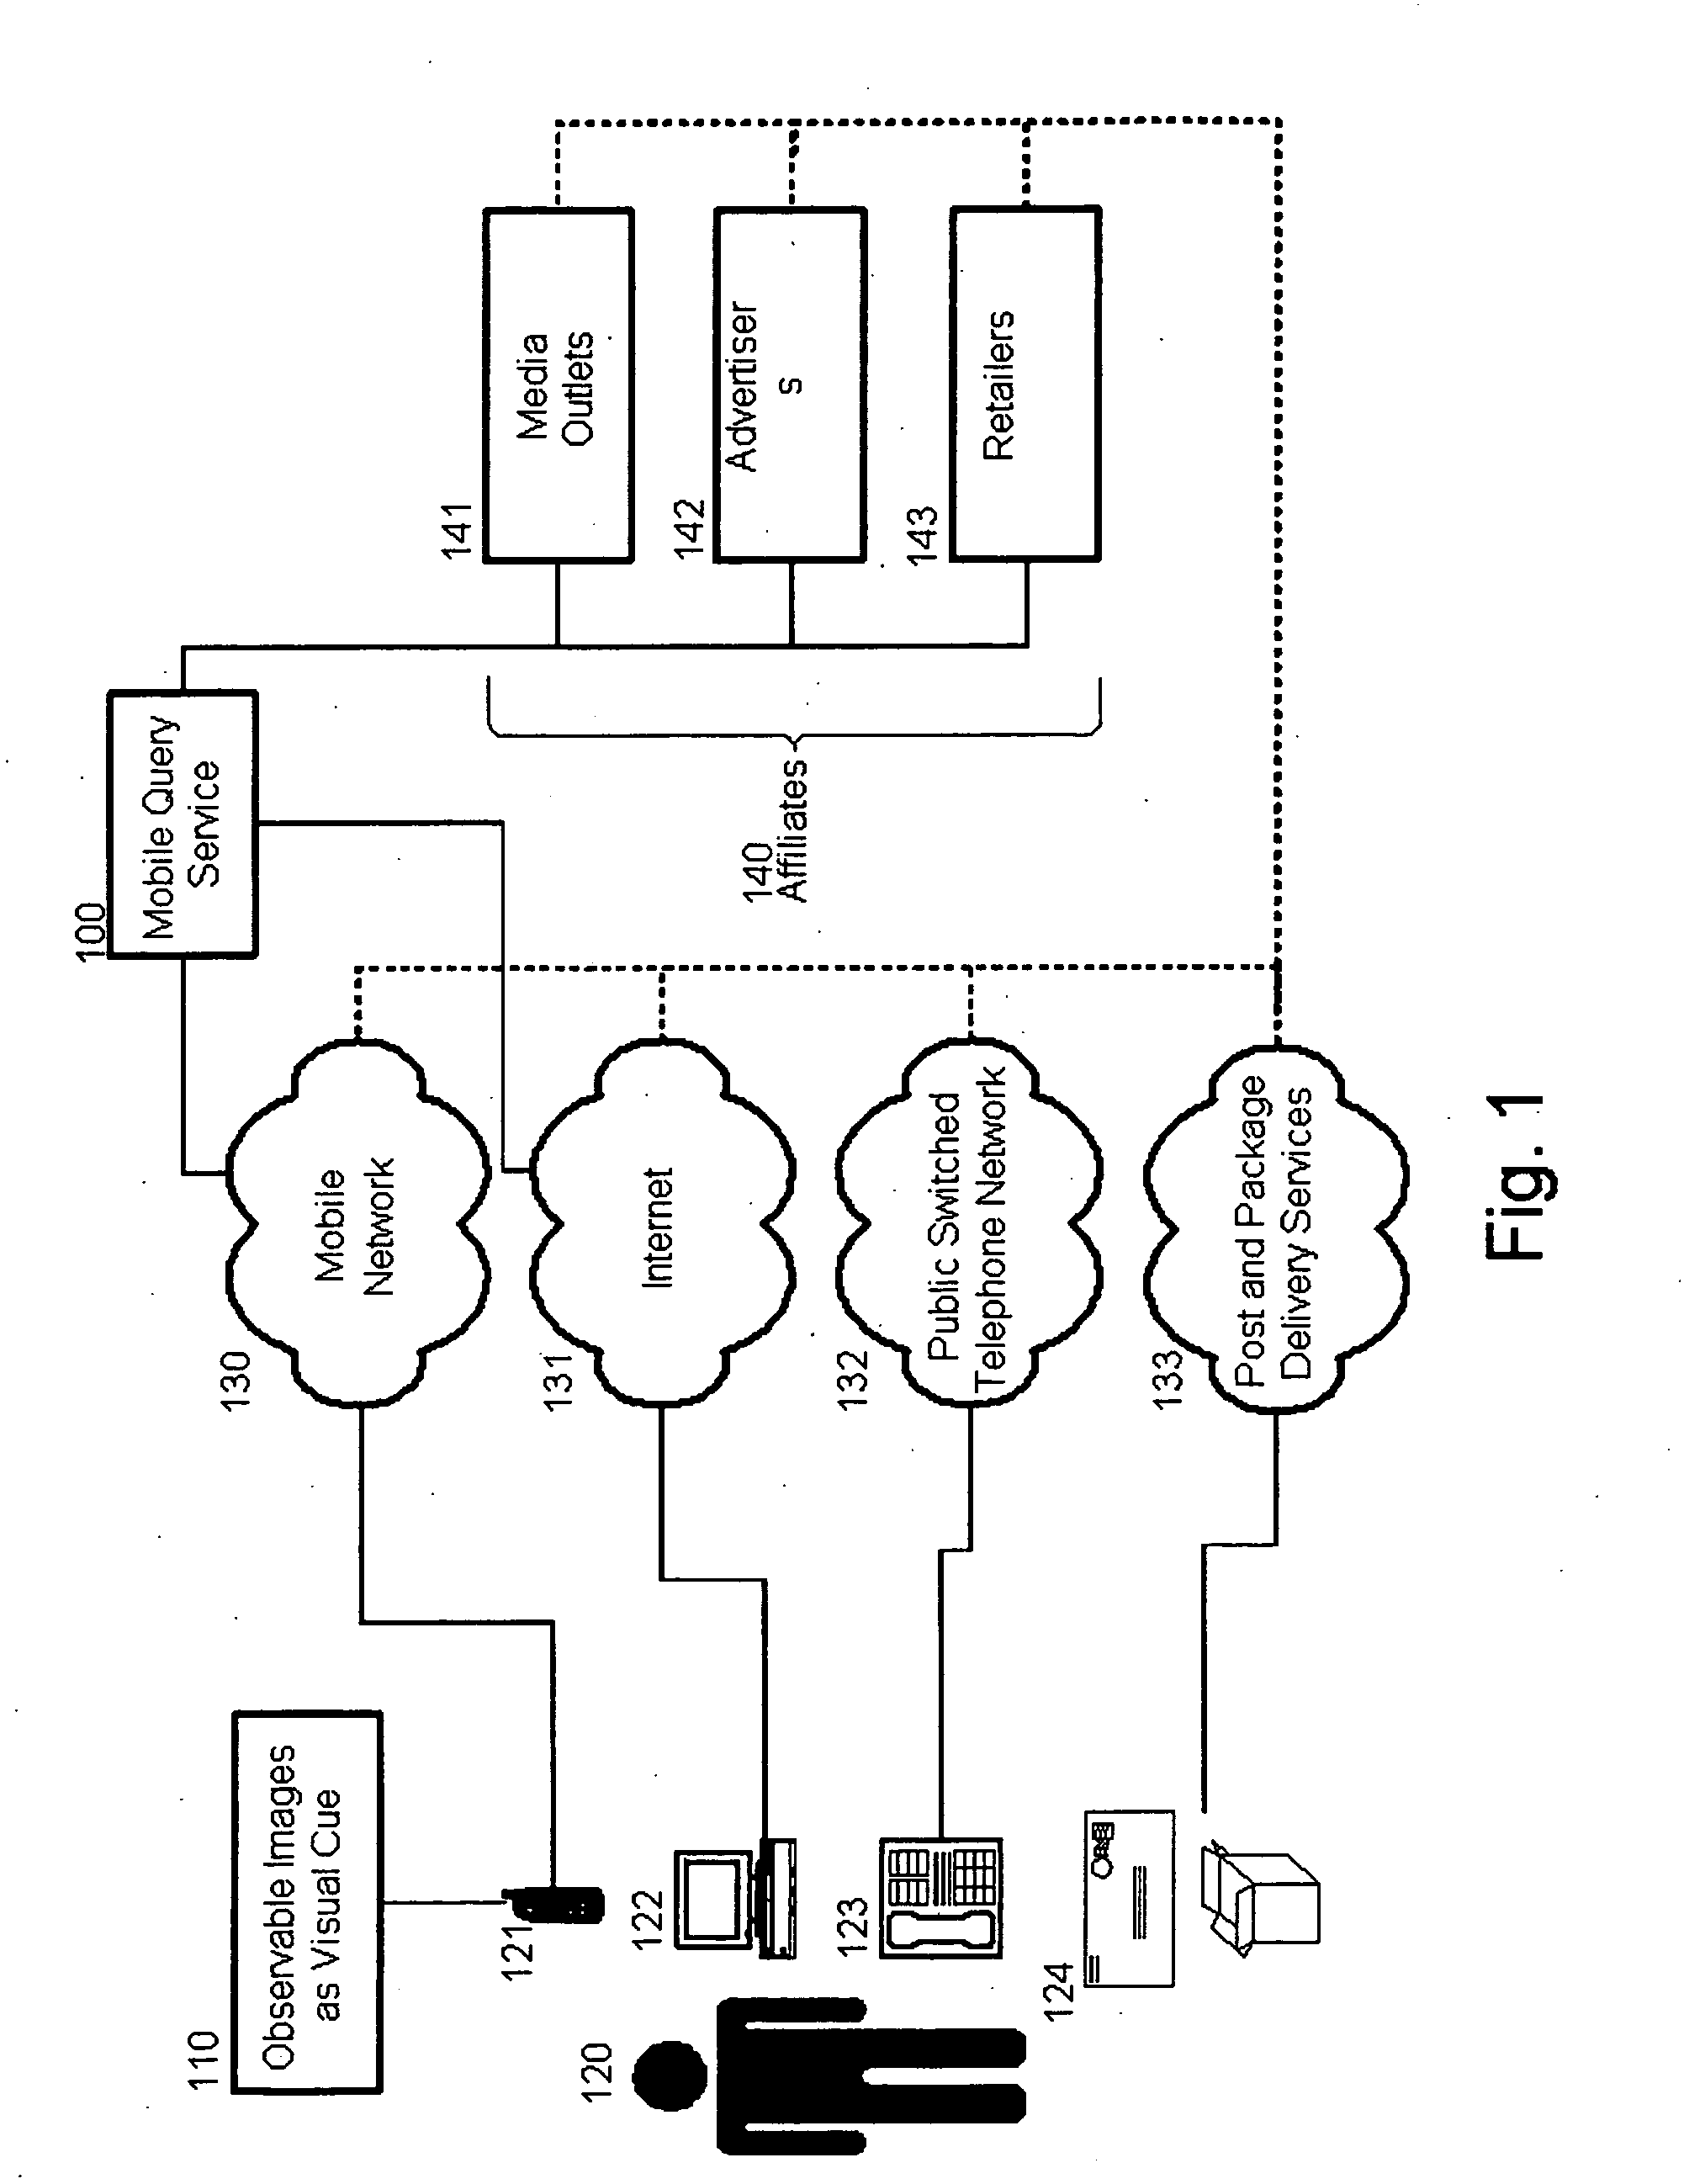 Mobile query system and method based on visual cues